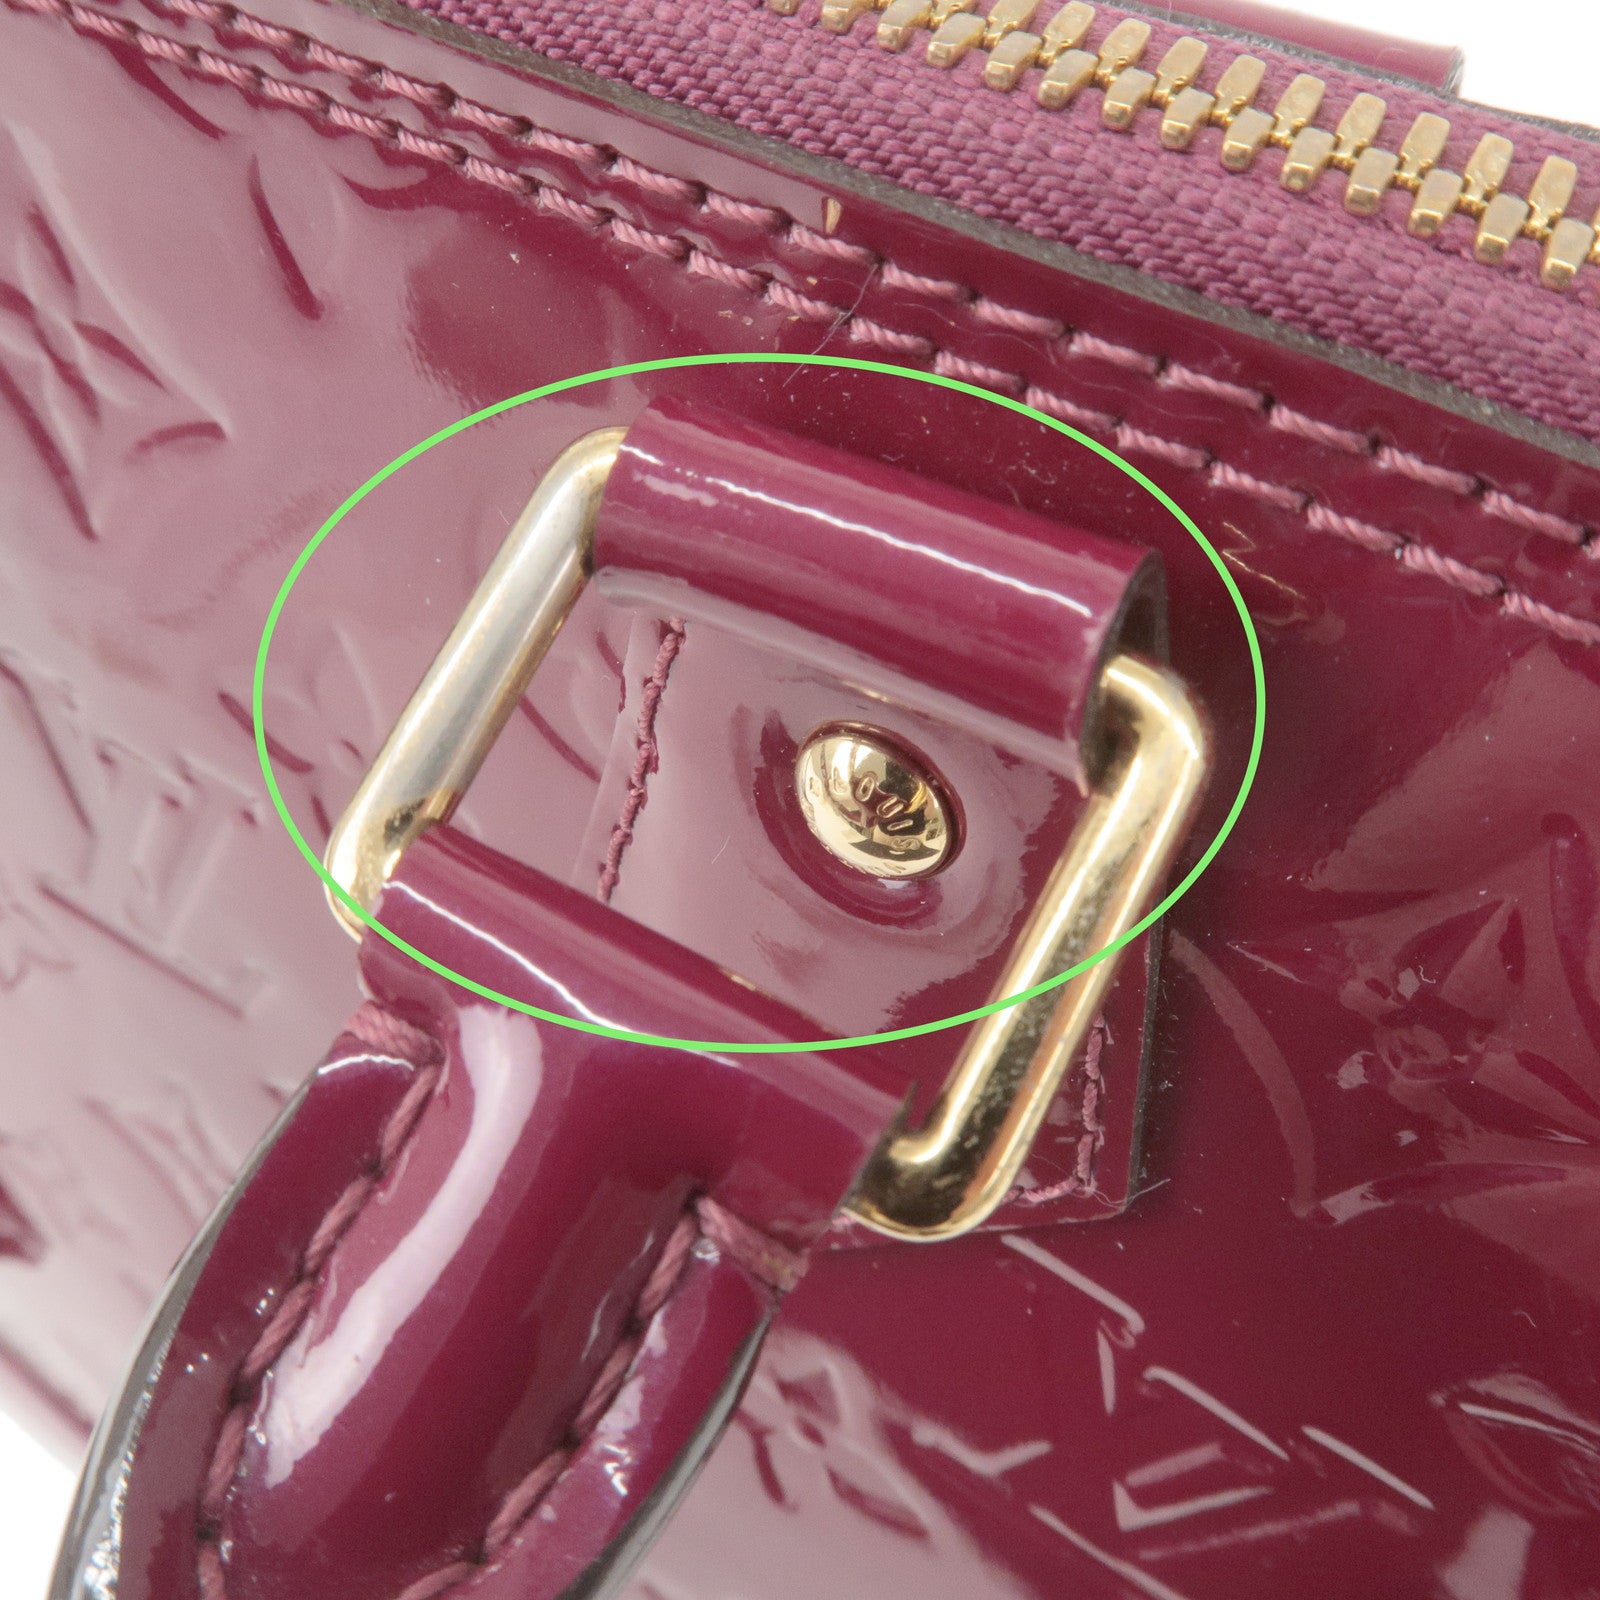 9/10 CONDITION! Louis Vuitton Alma Vernis PM Indian Rose Pink WITH Strap  DUSTBAG